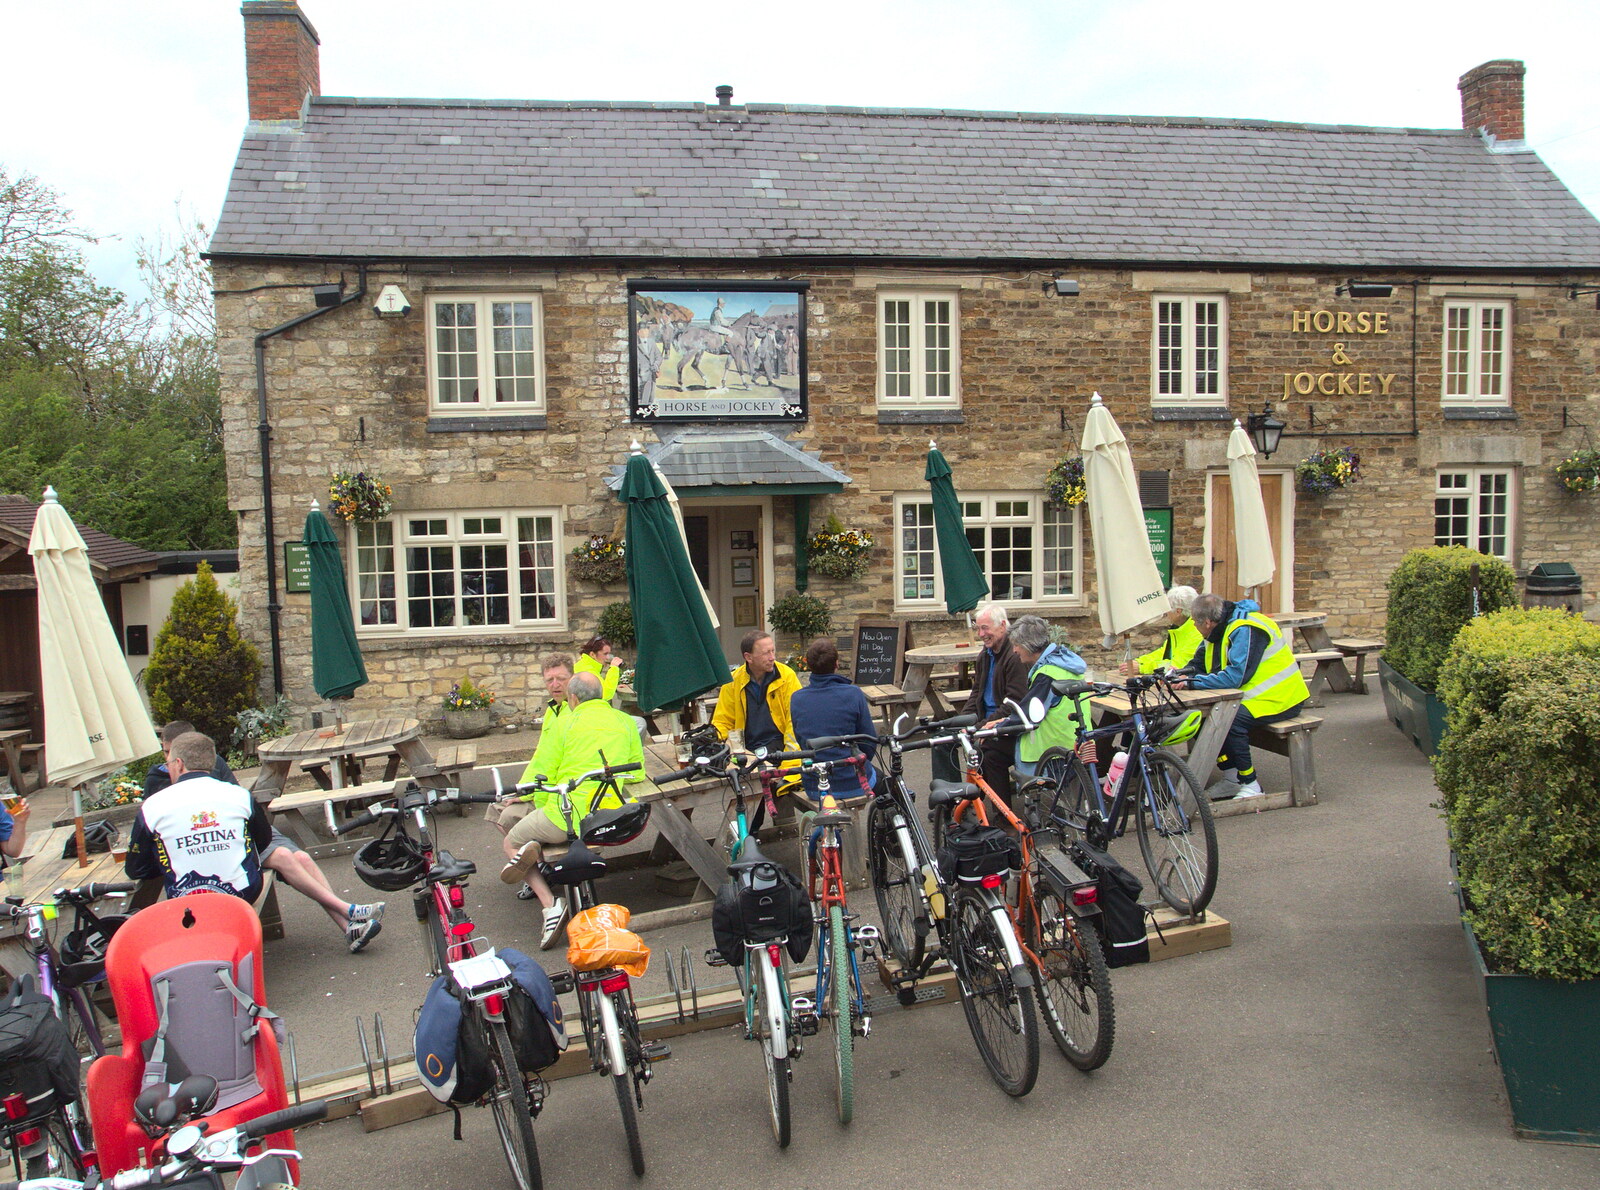 Massed bikes outside the Horse and Jockey from The BSCC Weekend Away, Lyddington, Rutland - 9th May 2015